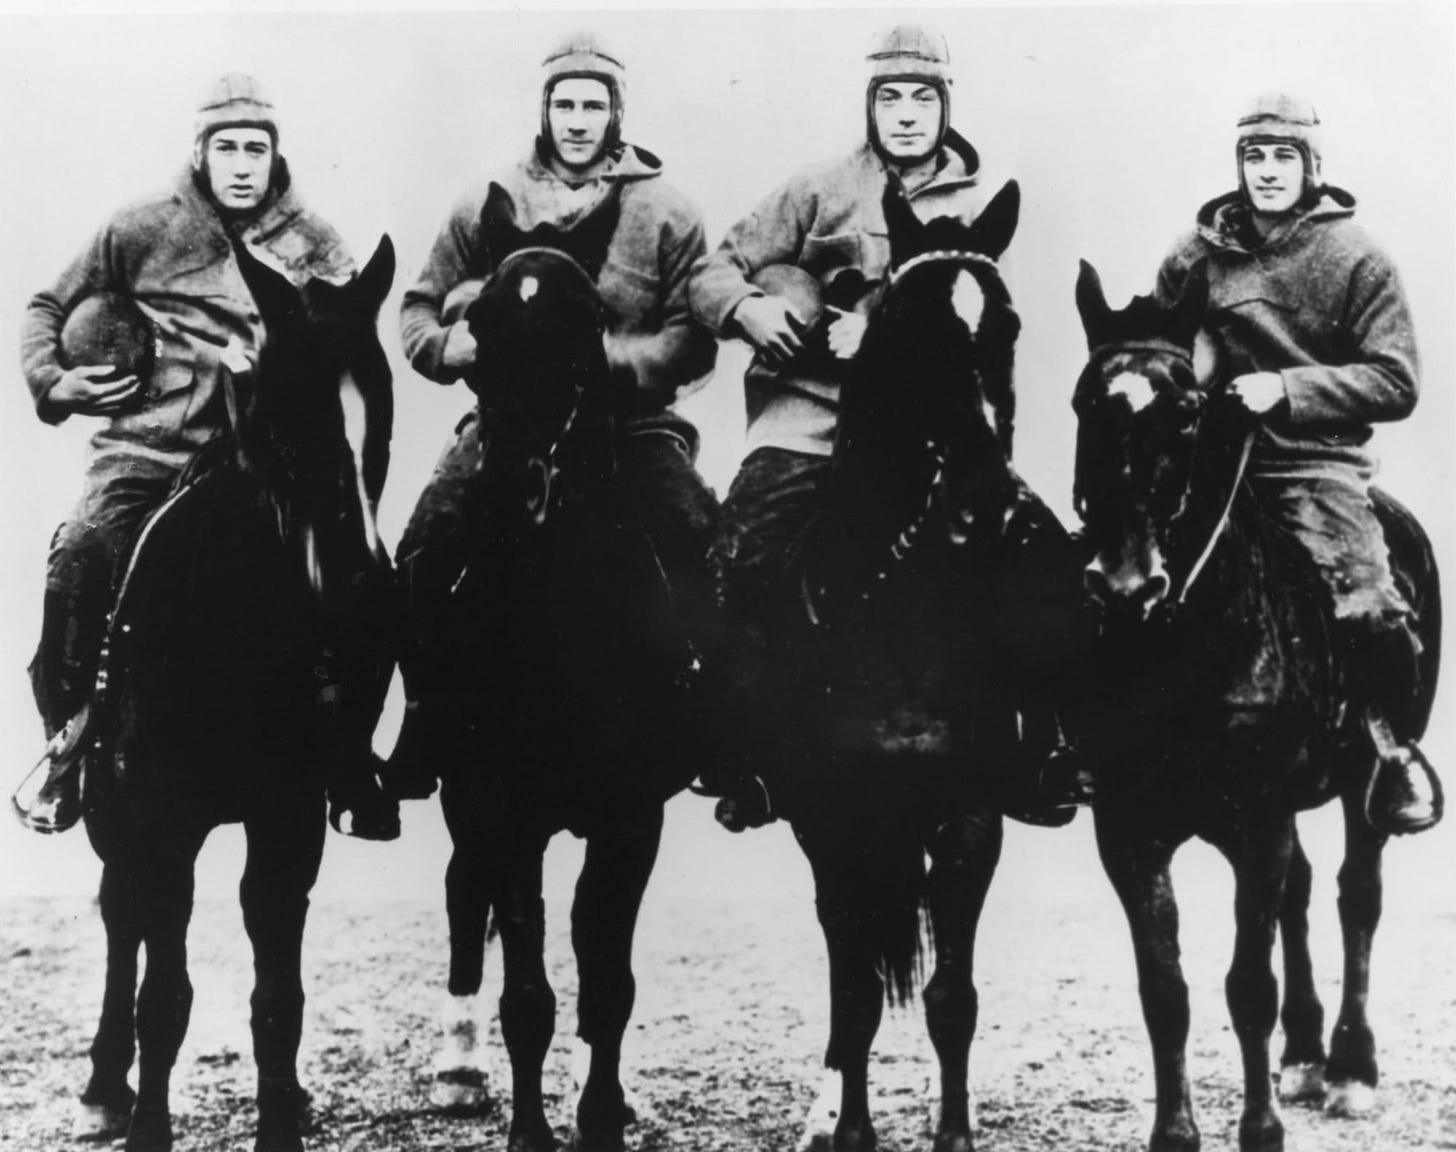 Notre Dame Football: Who was the best of The Four Horsemen?